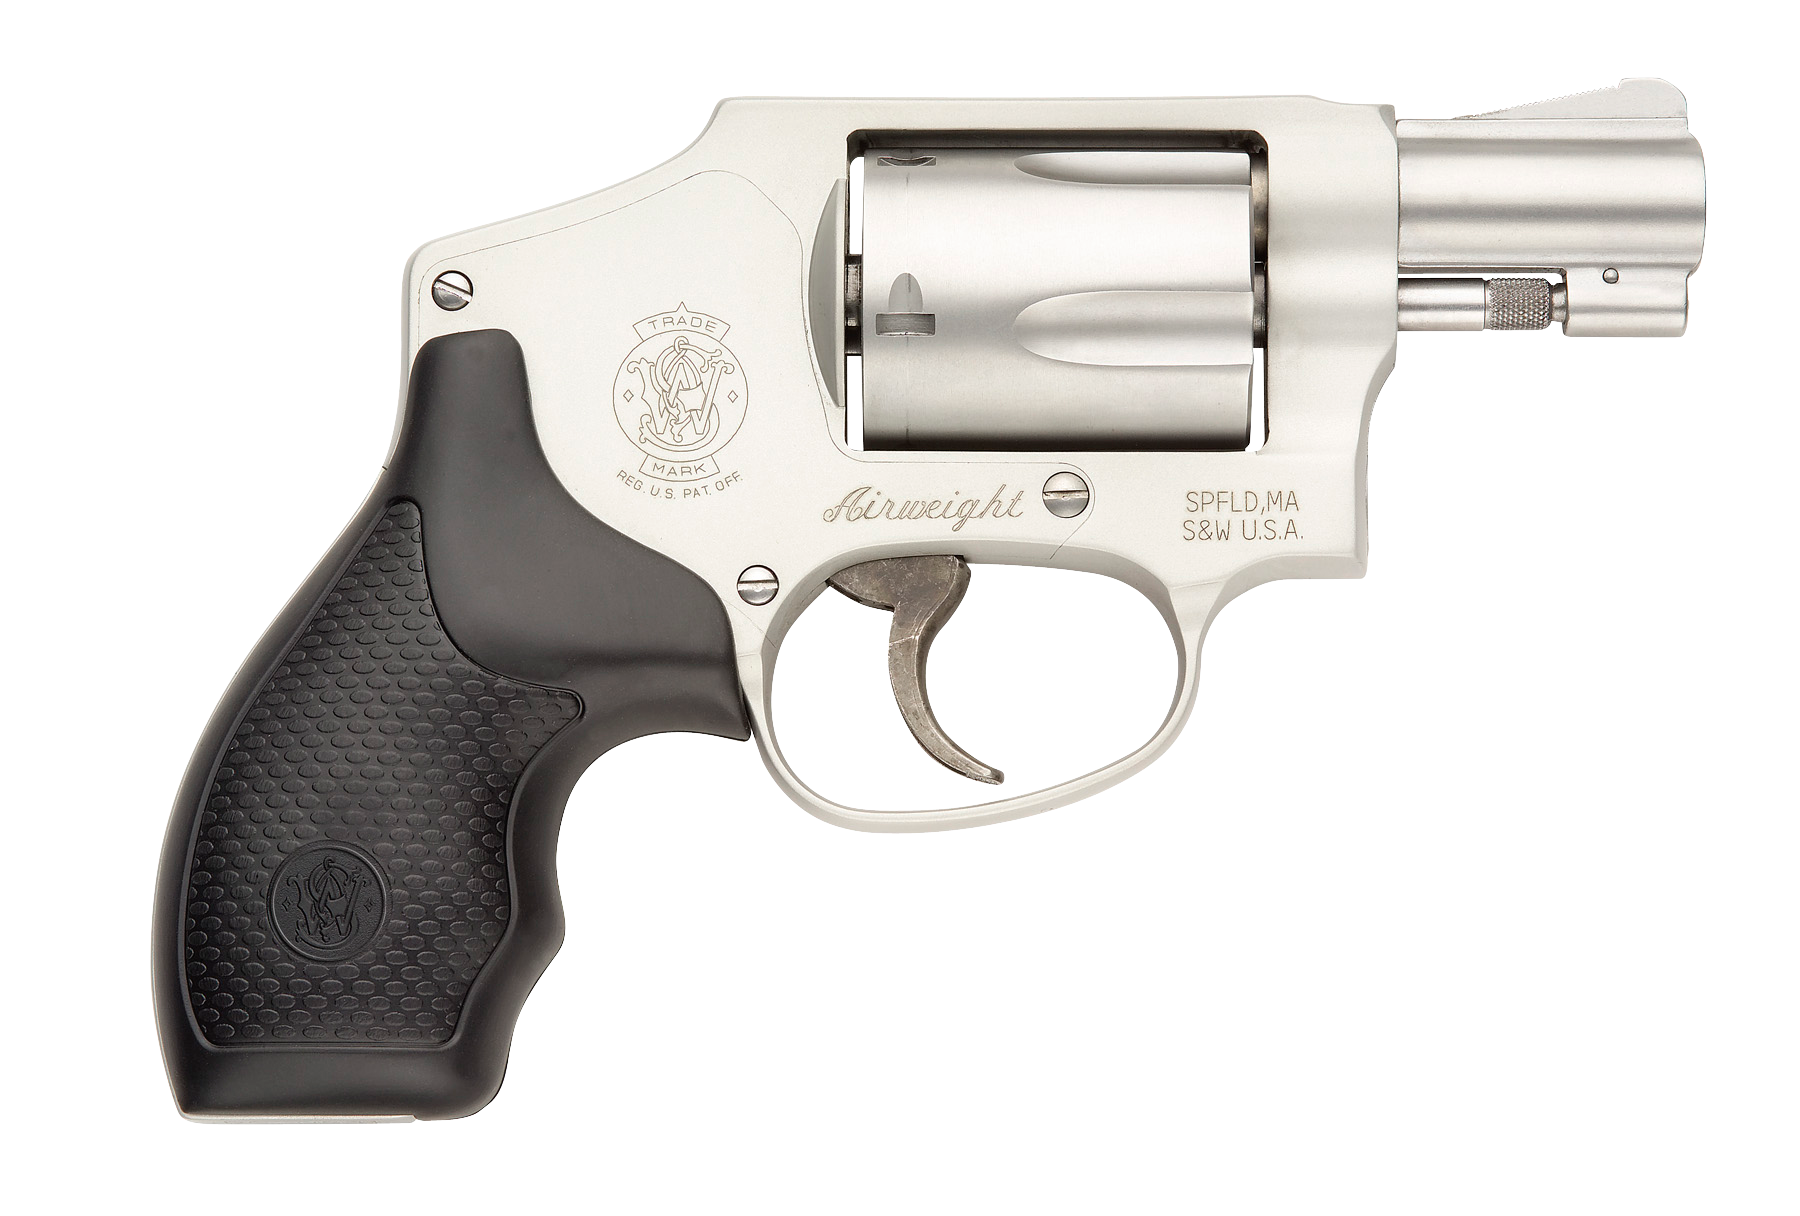 Smith & Wesson Double Action Revolvers in .38 and .32